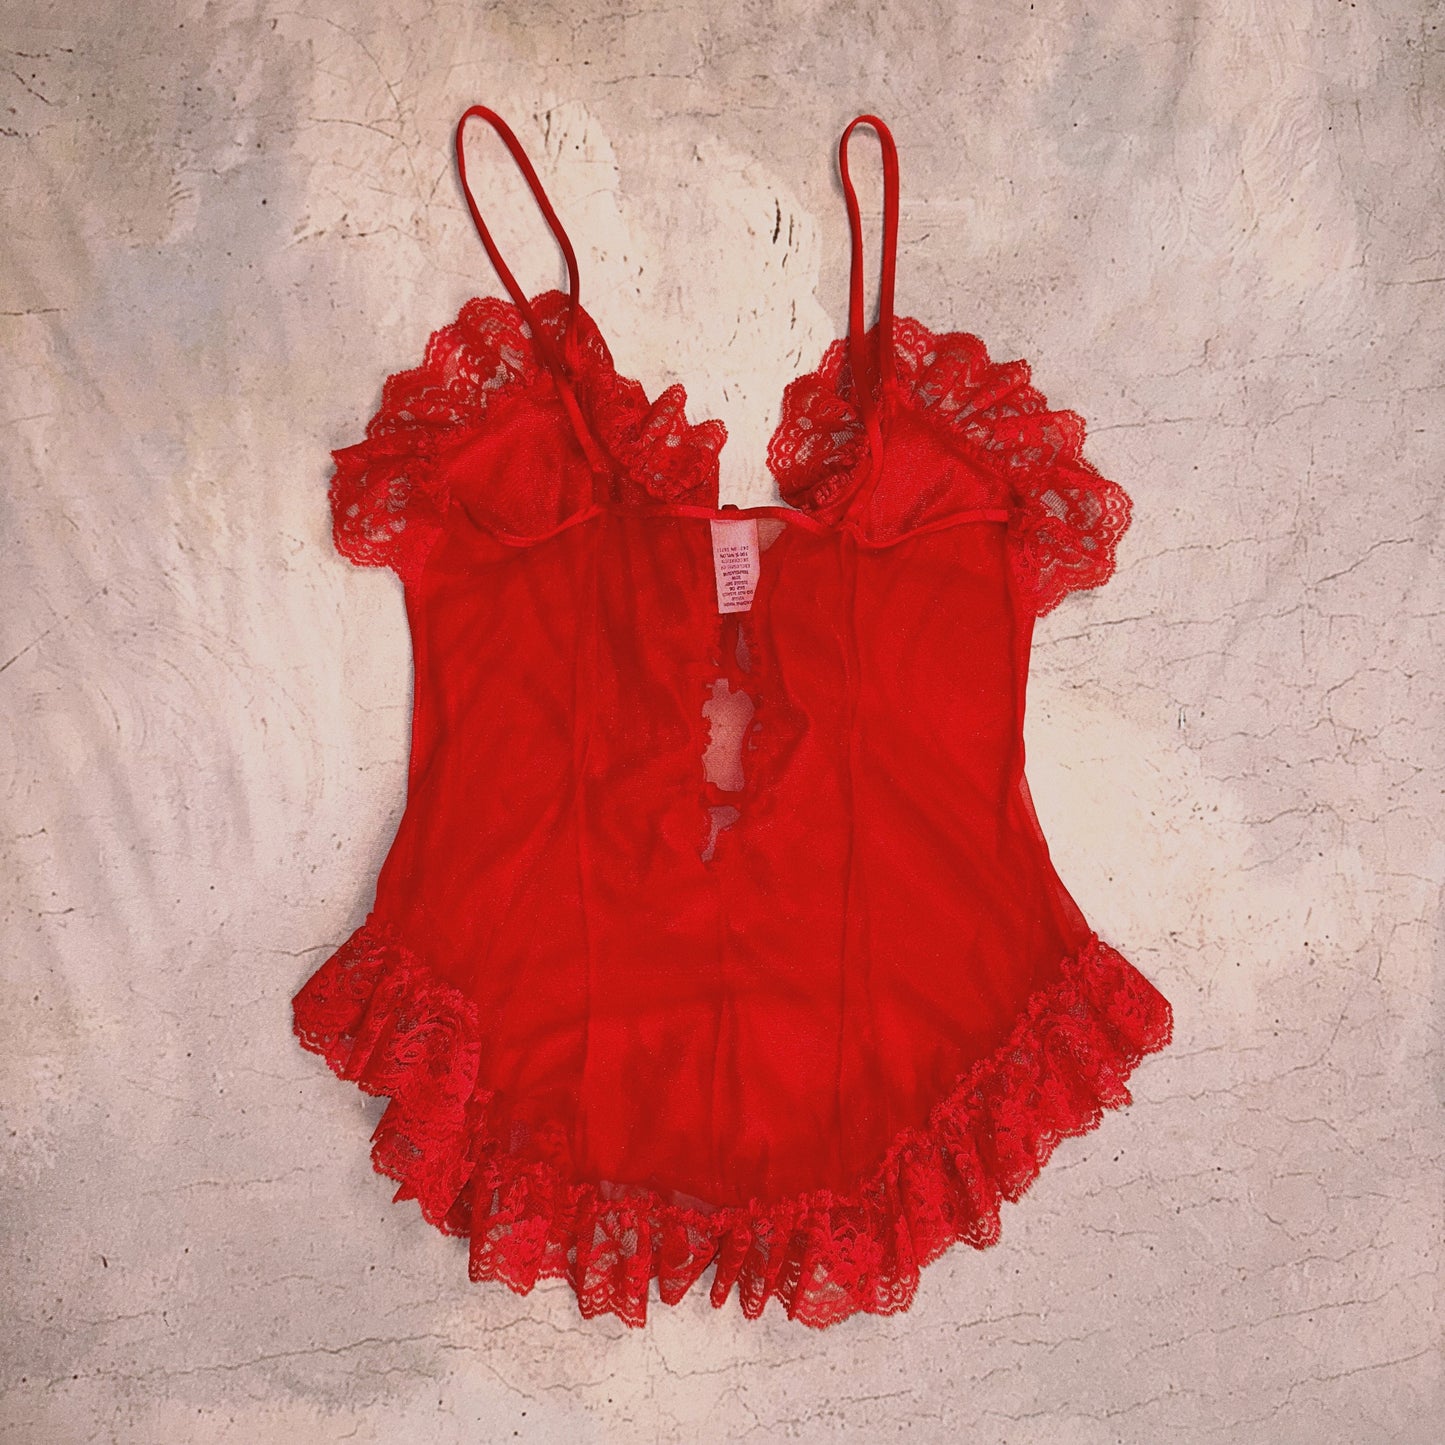 VINTAGE 80s 90s RED RUFFLE CAMI TOP